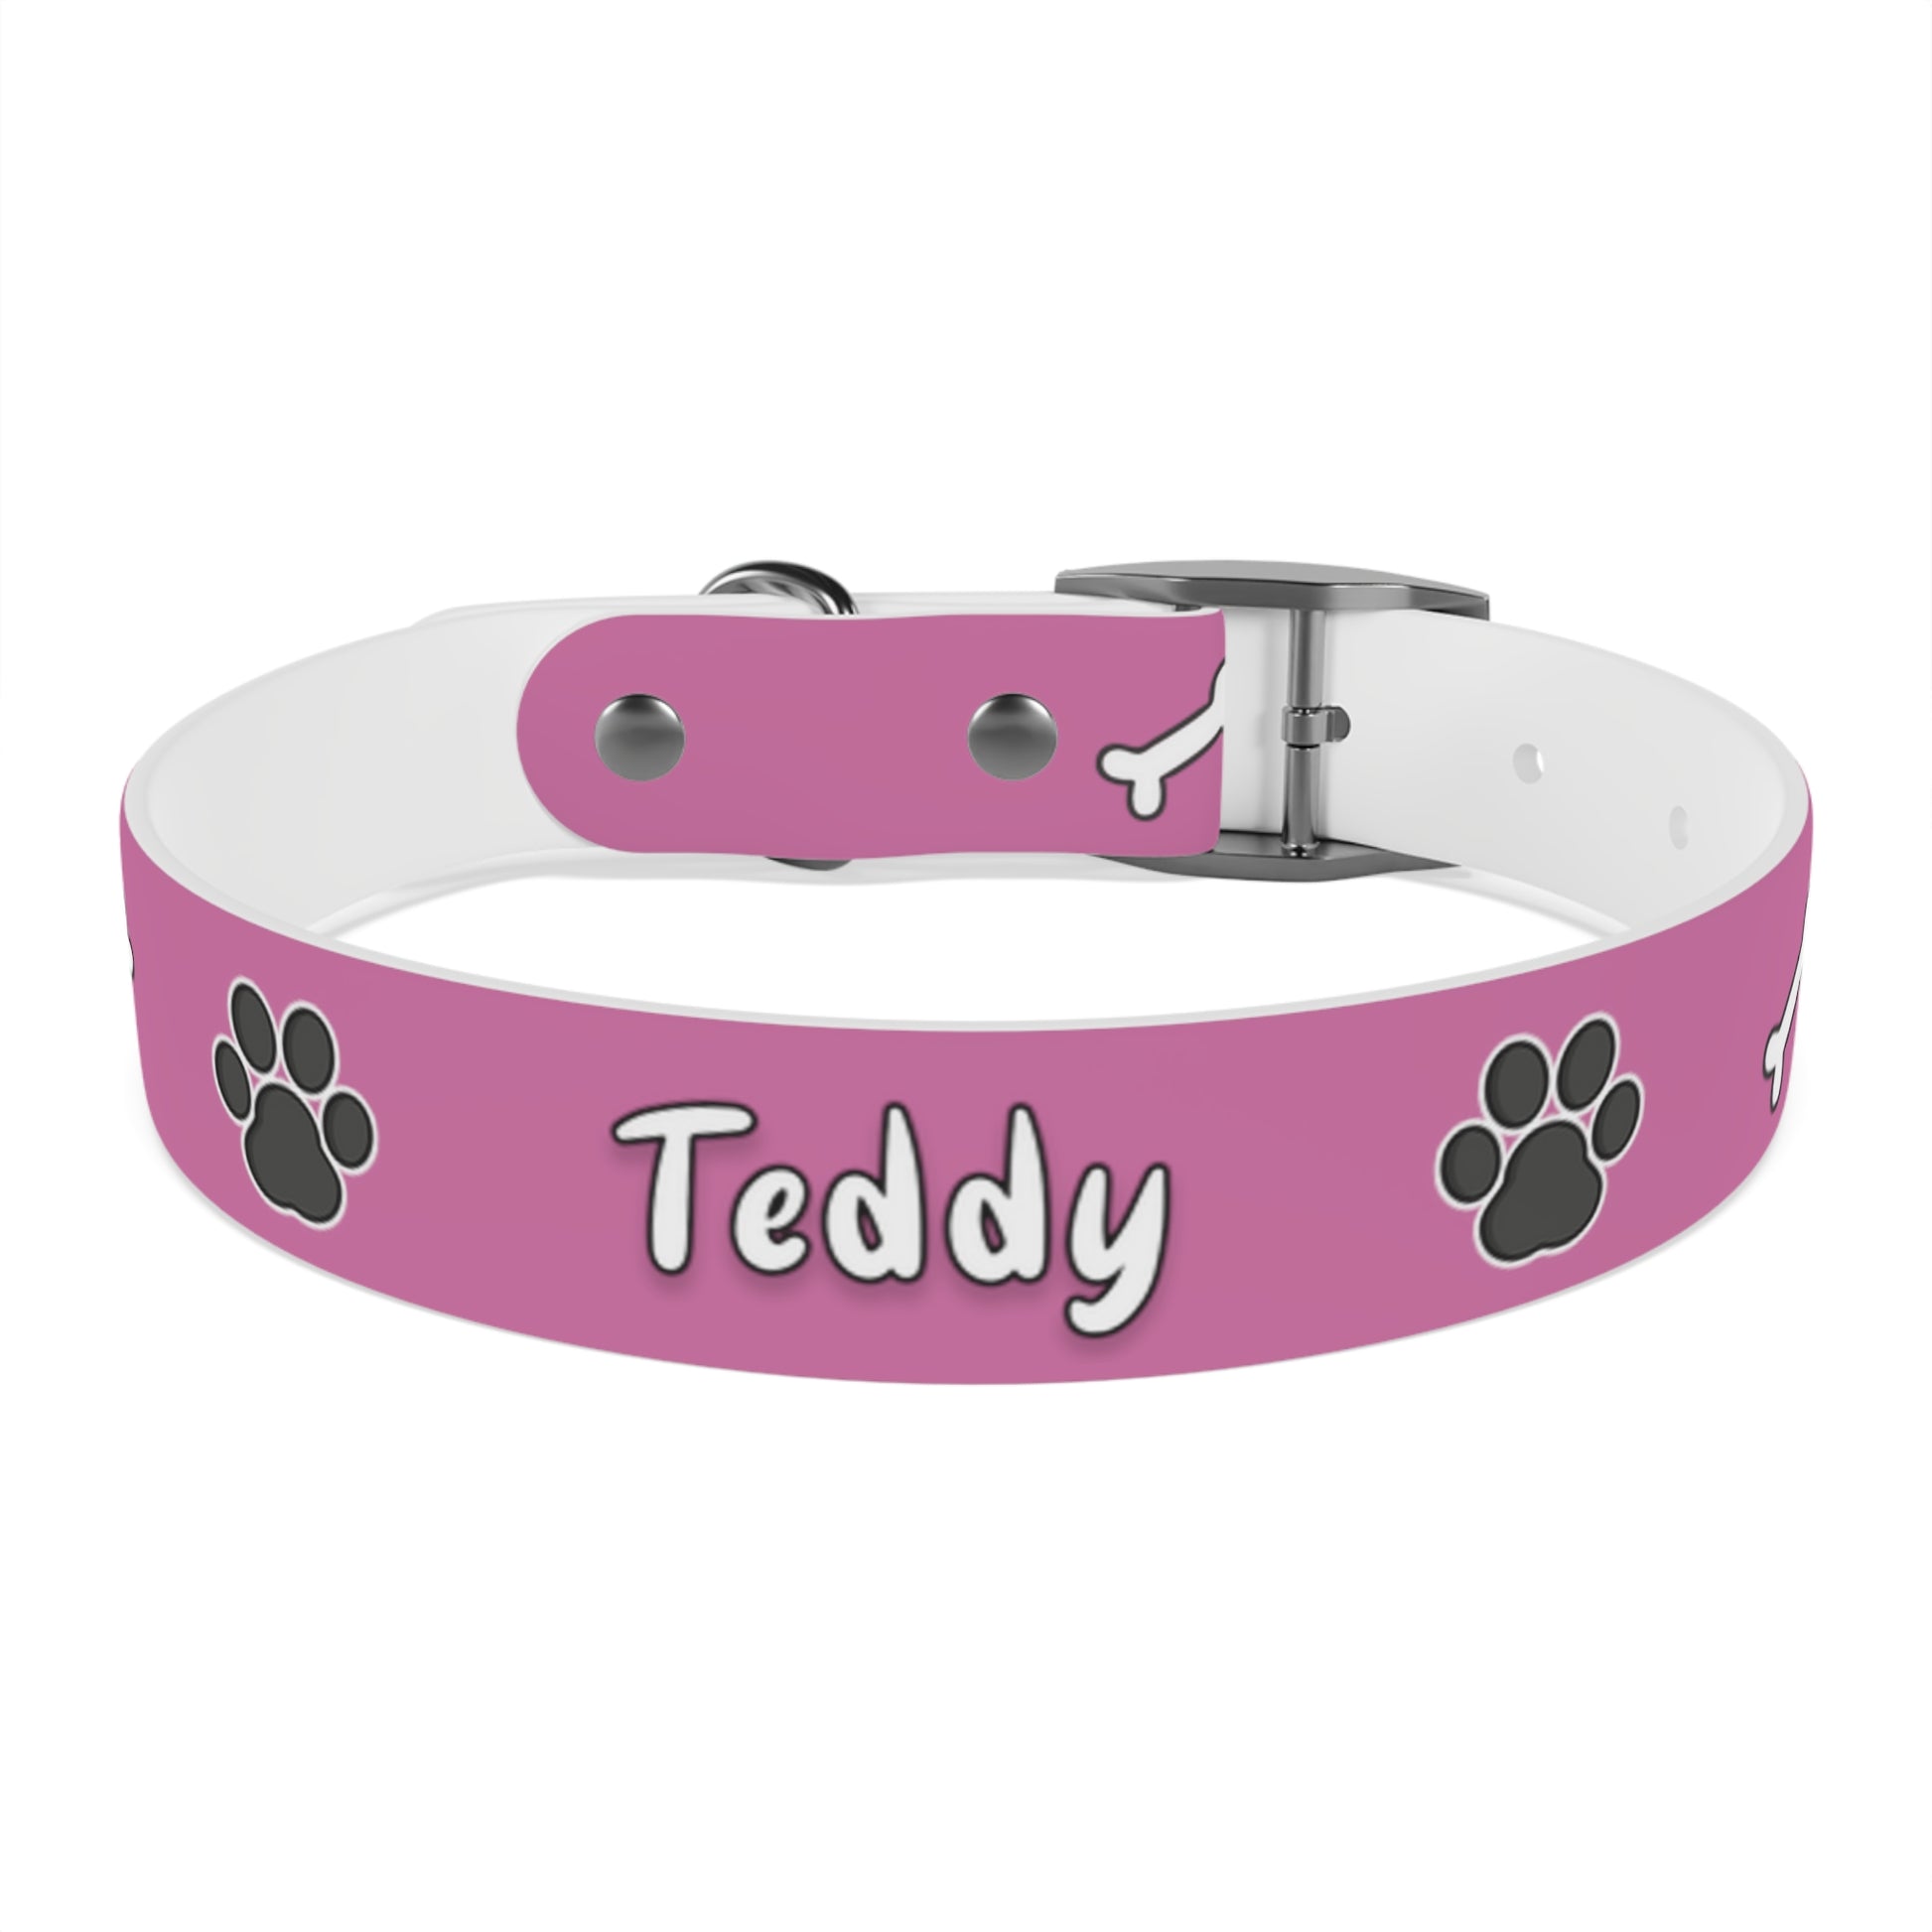 a dog collar with dog bones and paws design. The name of the dog is in the middle of the pet collar.  The dog collar color is pink